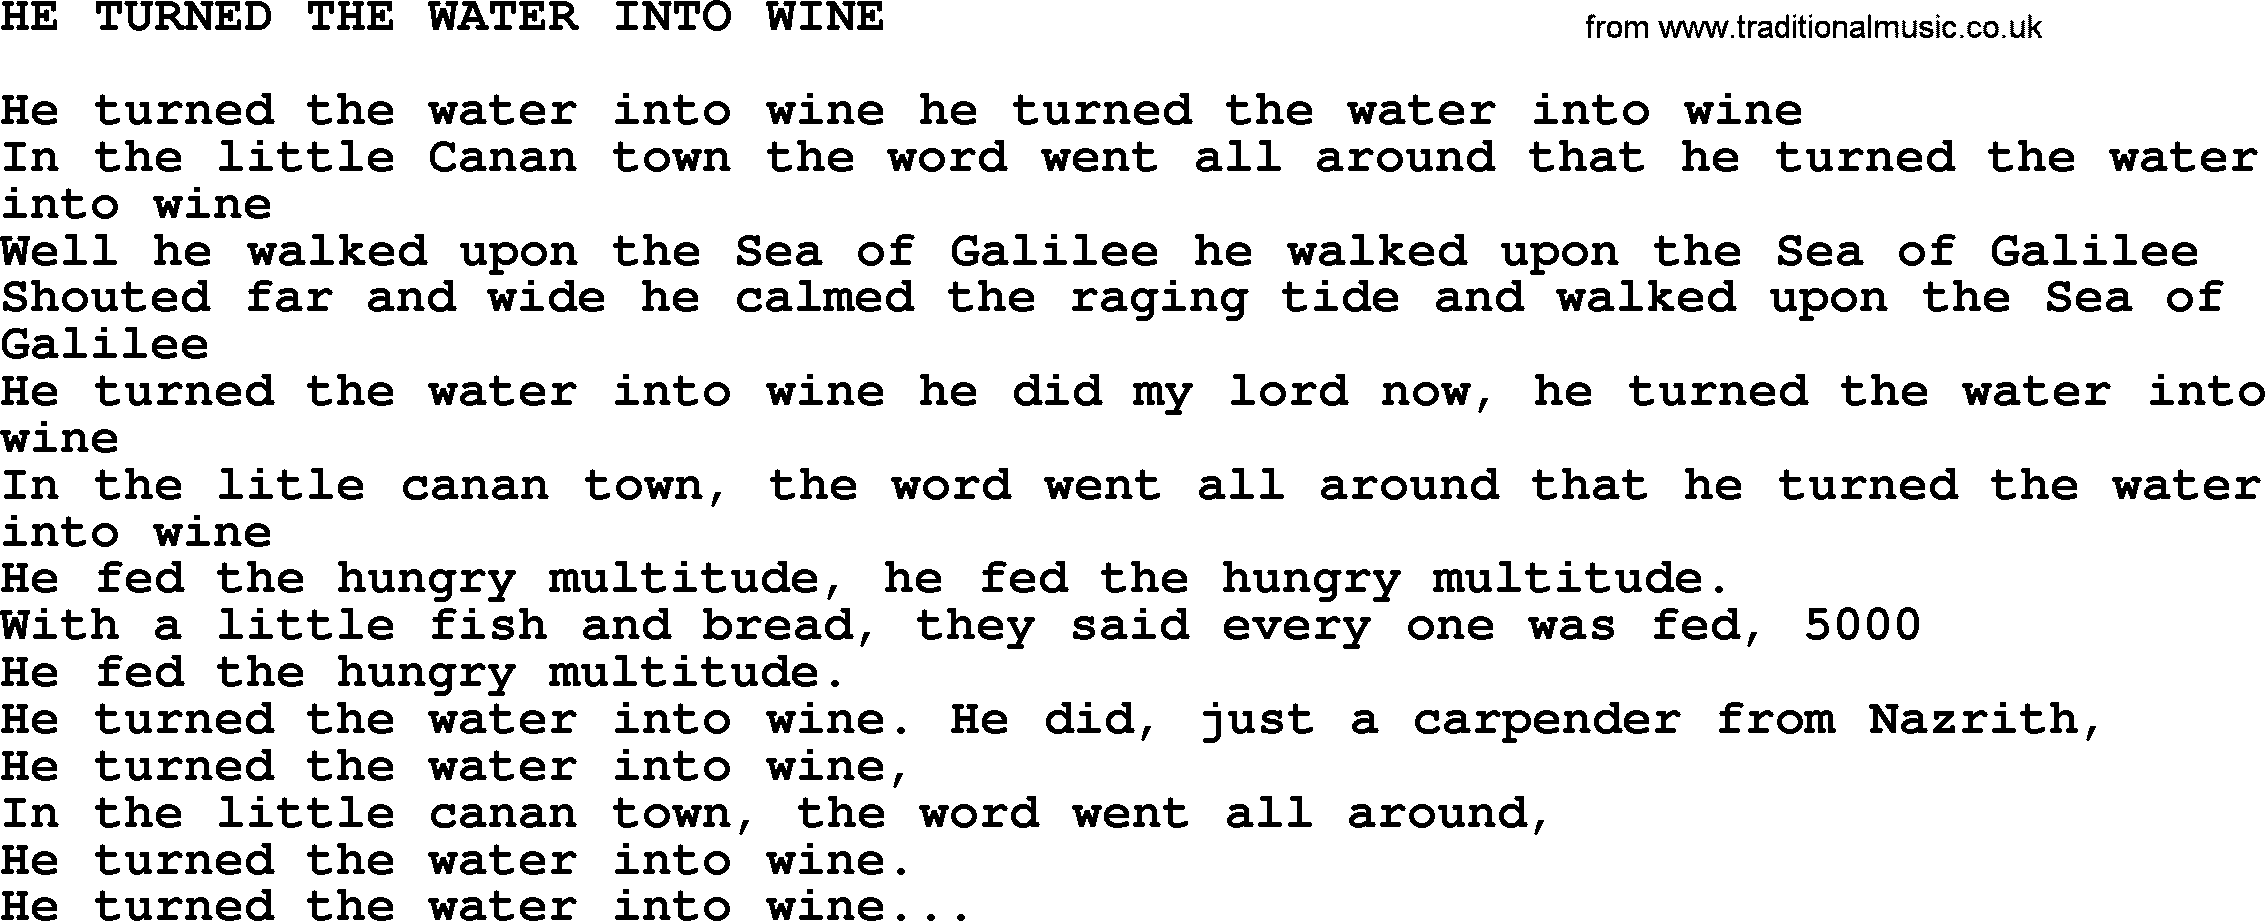 Johnny Cash Song He Turned The Water Into Wine Lyrics